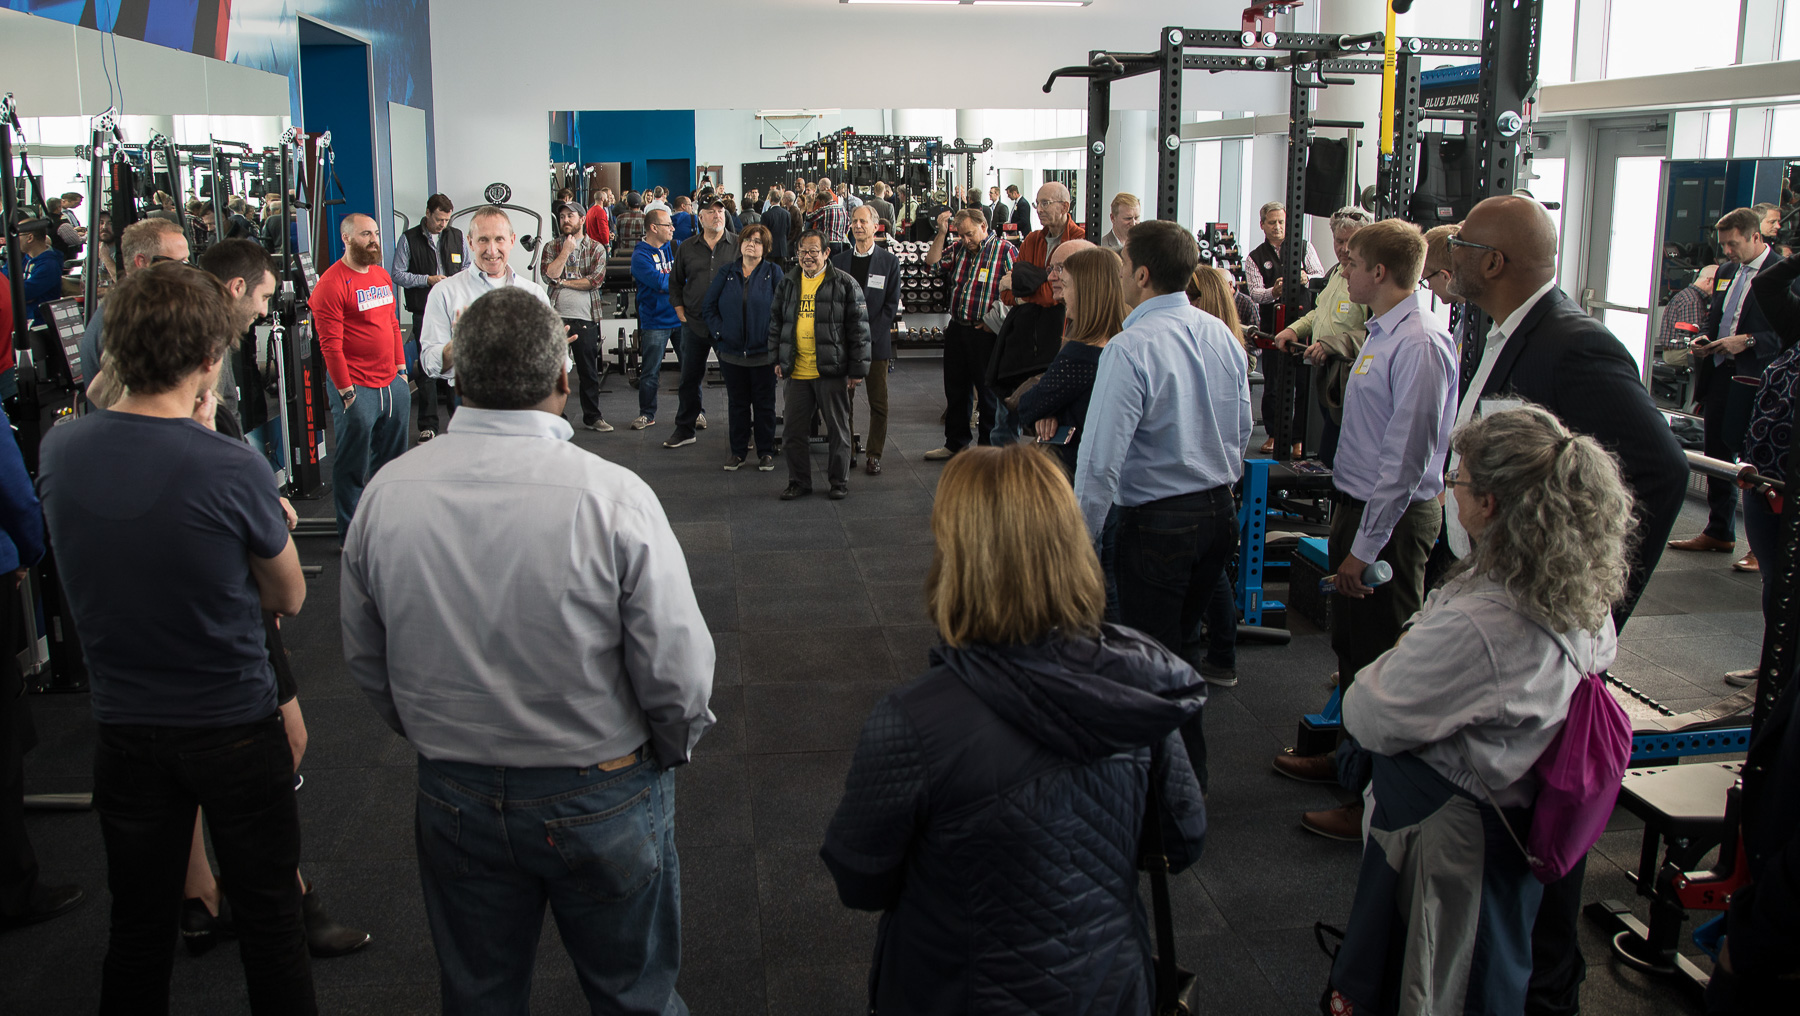 Attendees explore the weight room during the Chicago Ideas Week tour. (DePaul University/Jeff Carrion)